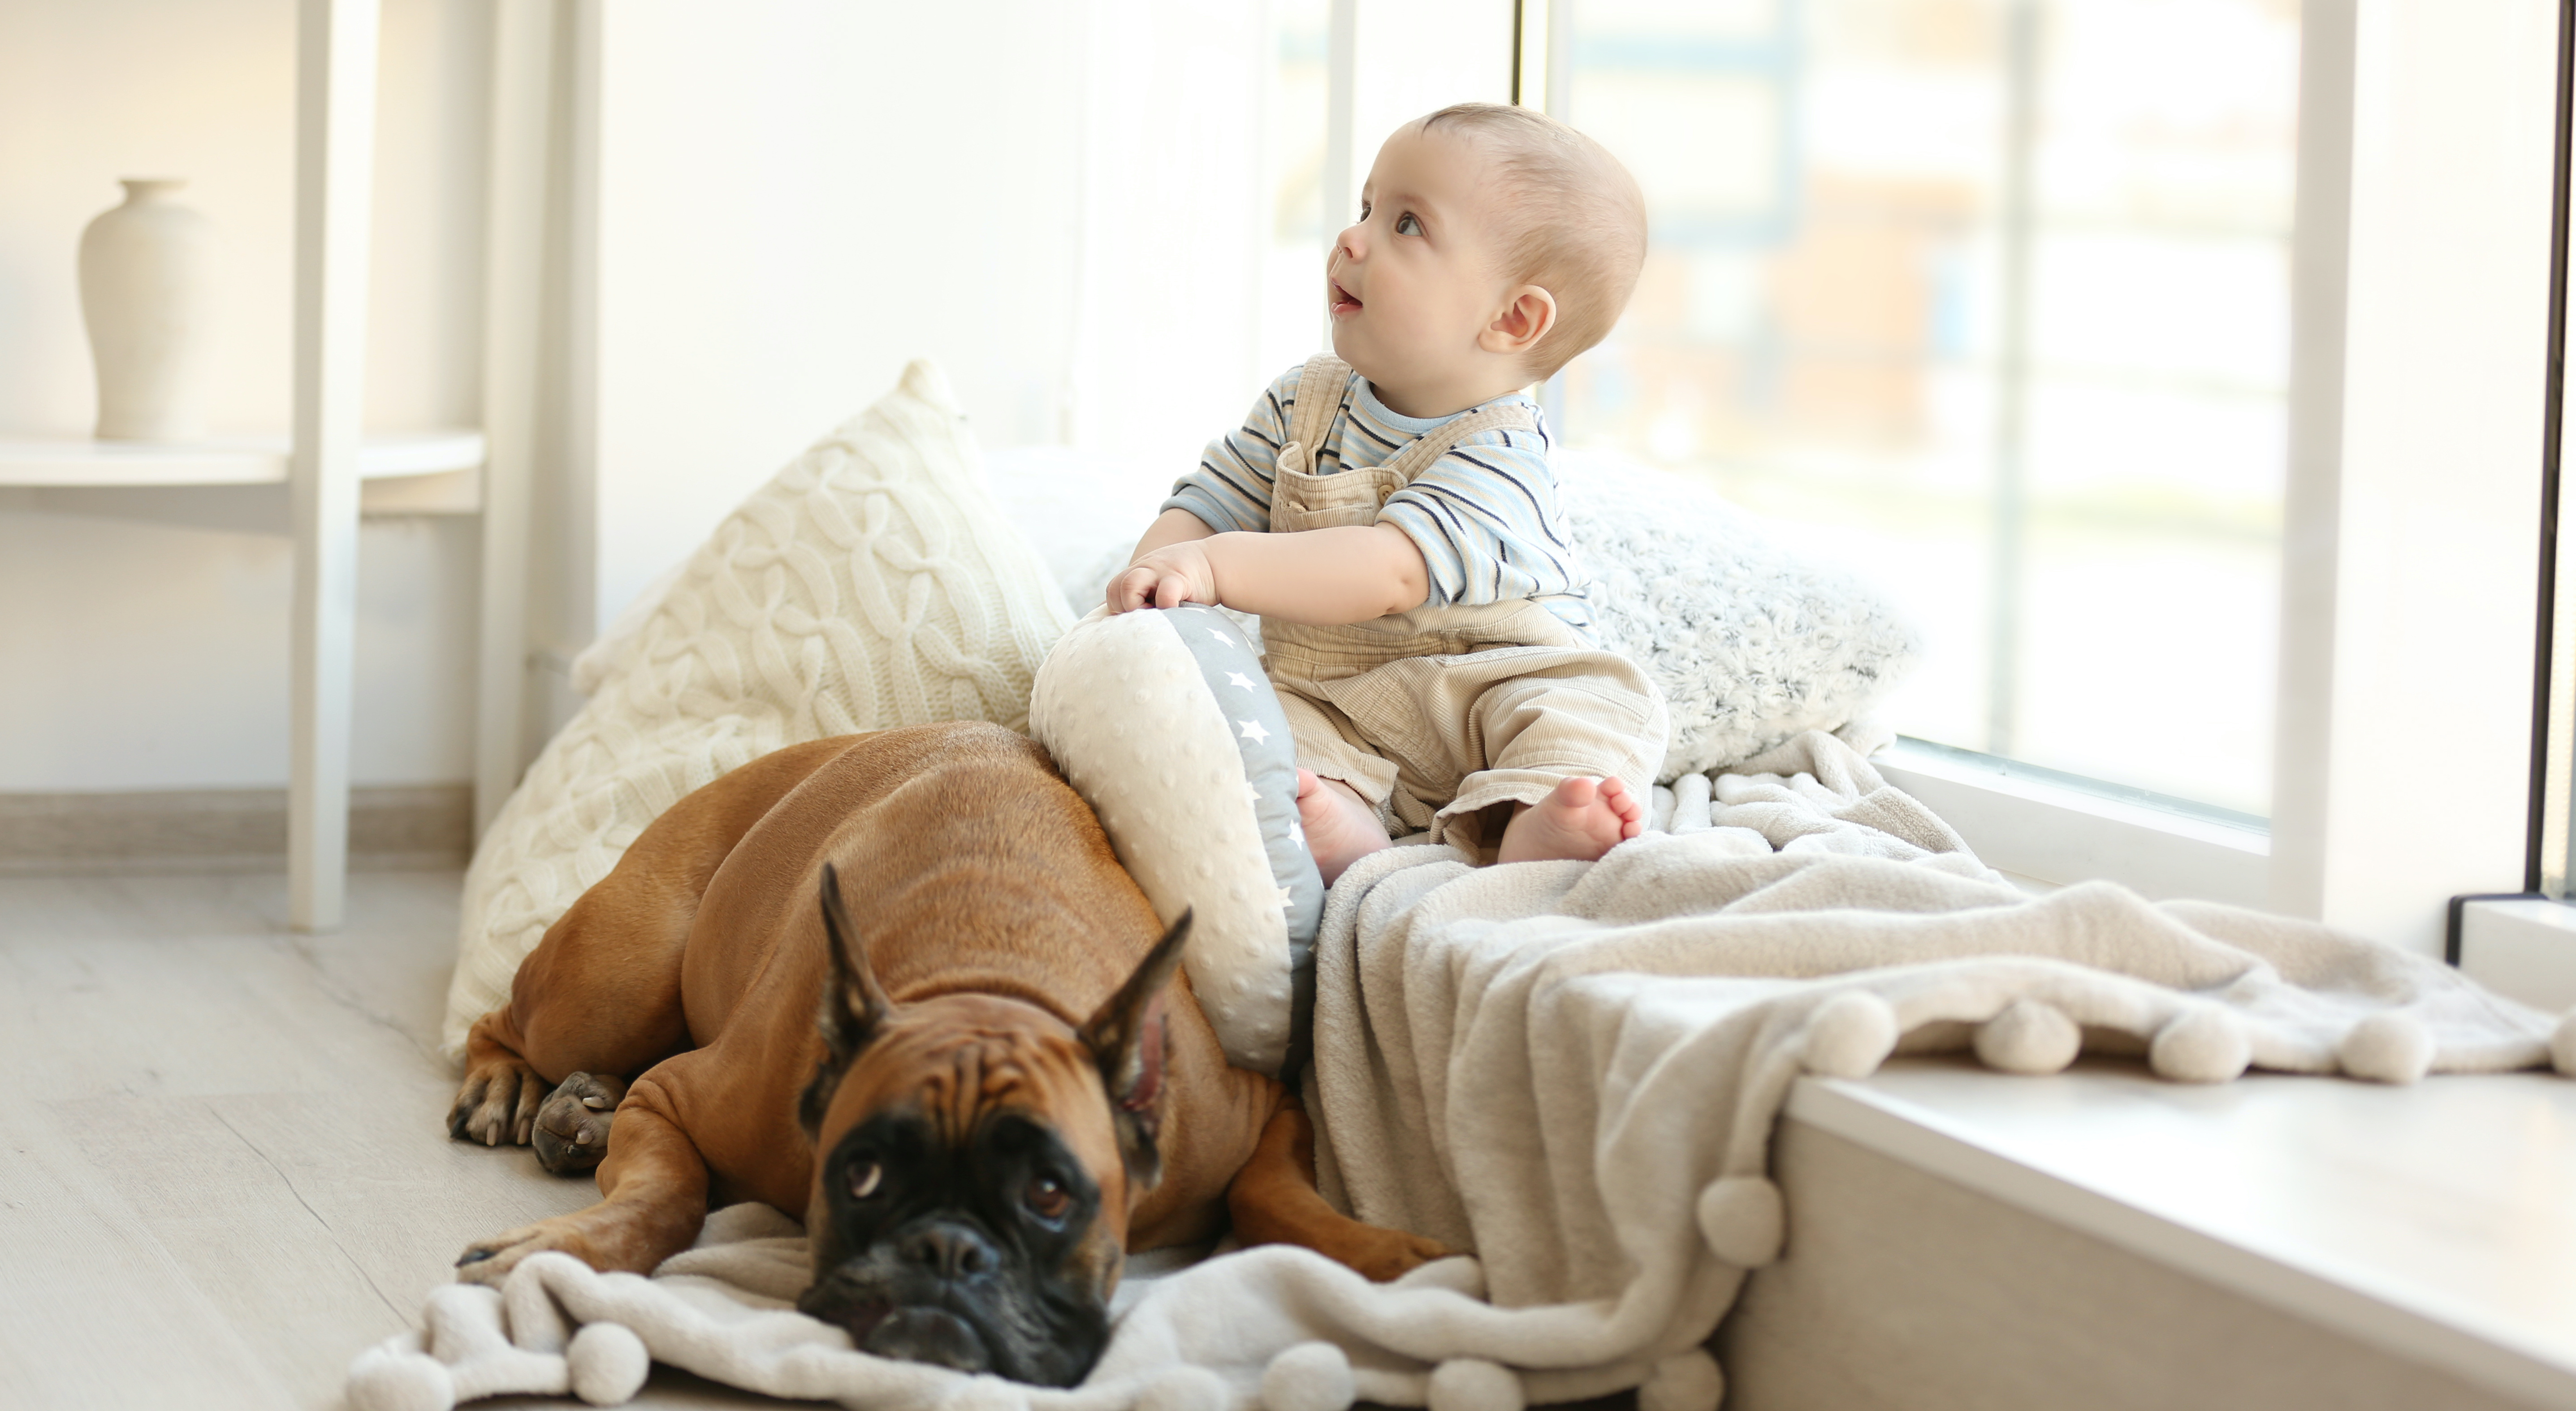 A baby and a boxer dog cuddle in front of a large window.